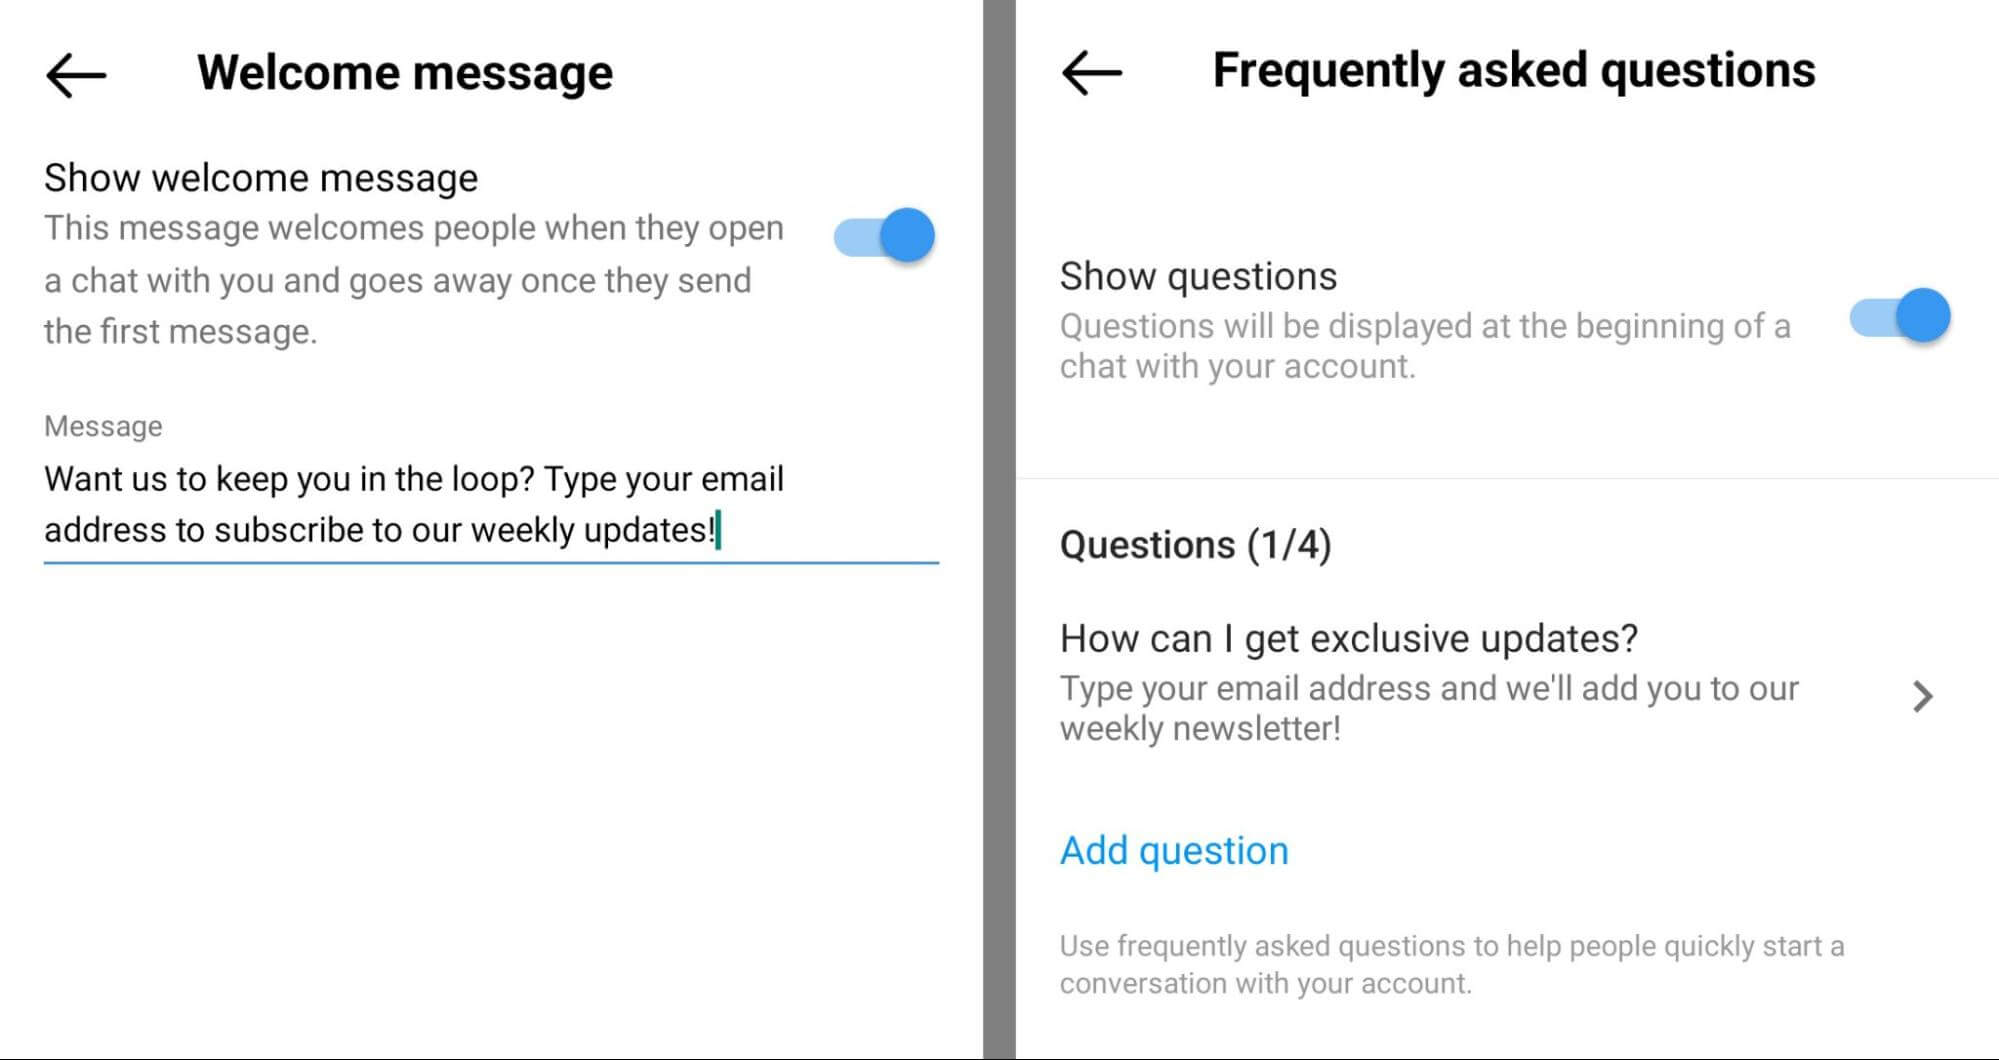 how-to-improve-your-own-approach-to-engagment-on-instagram-automated-dms-in-app-chat-tools-set-up-welcome-message-and-frequently-asked-questions-response-time-example-15